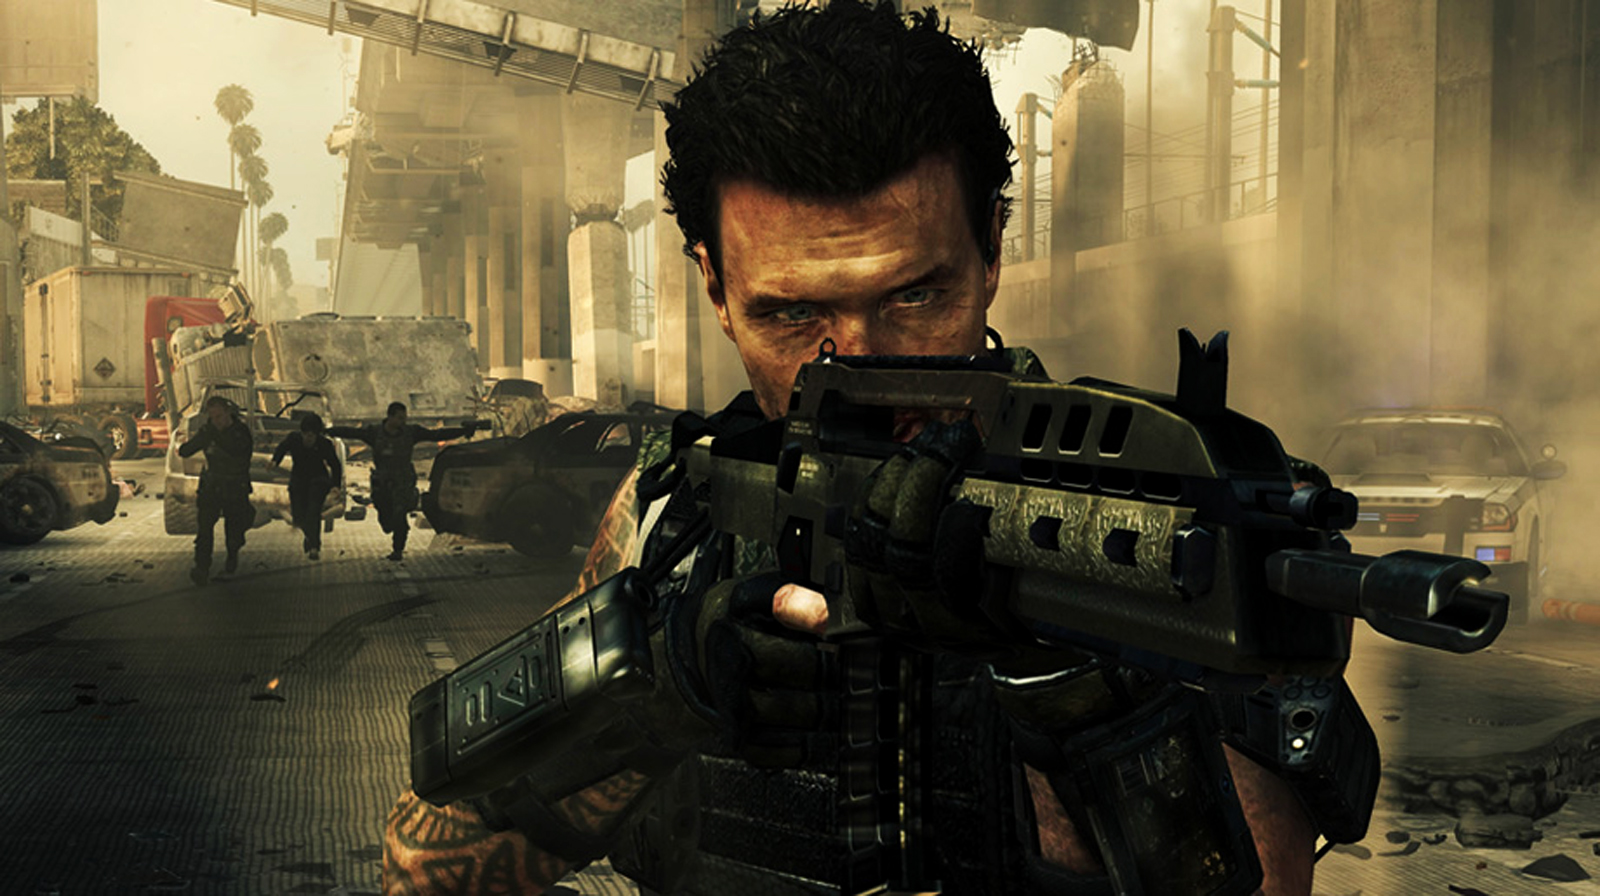 HD Call Of Duty Black Ops 2 Wallpapers and Photos | HD Games ...